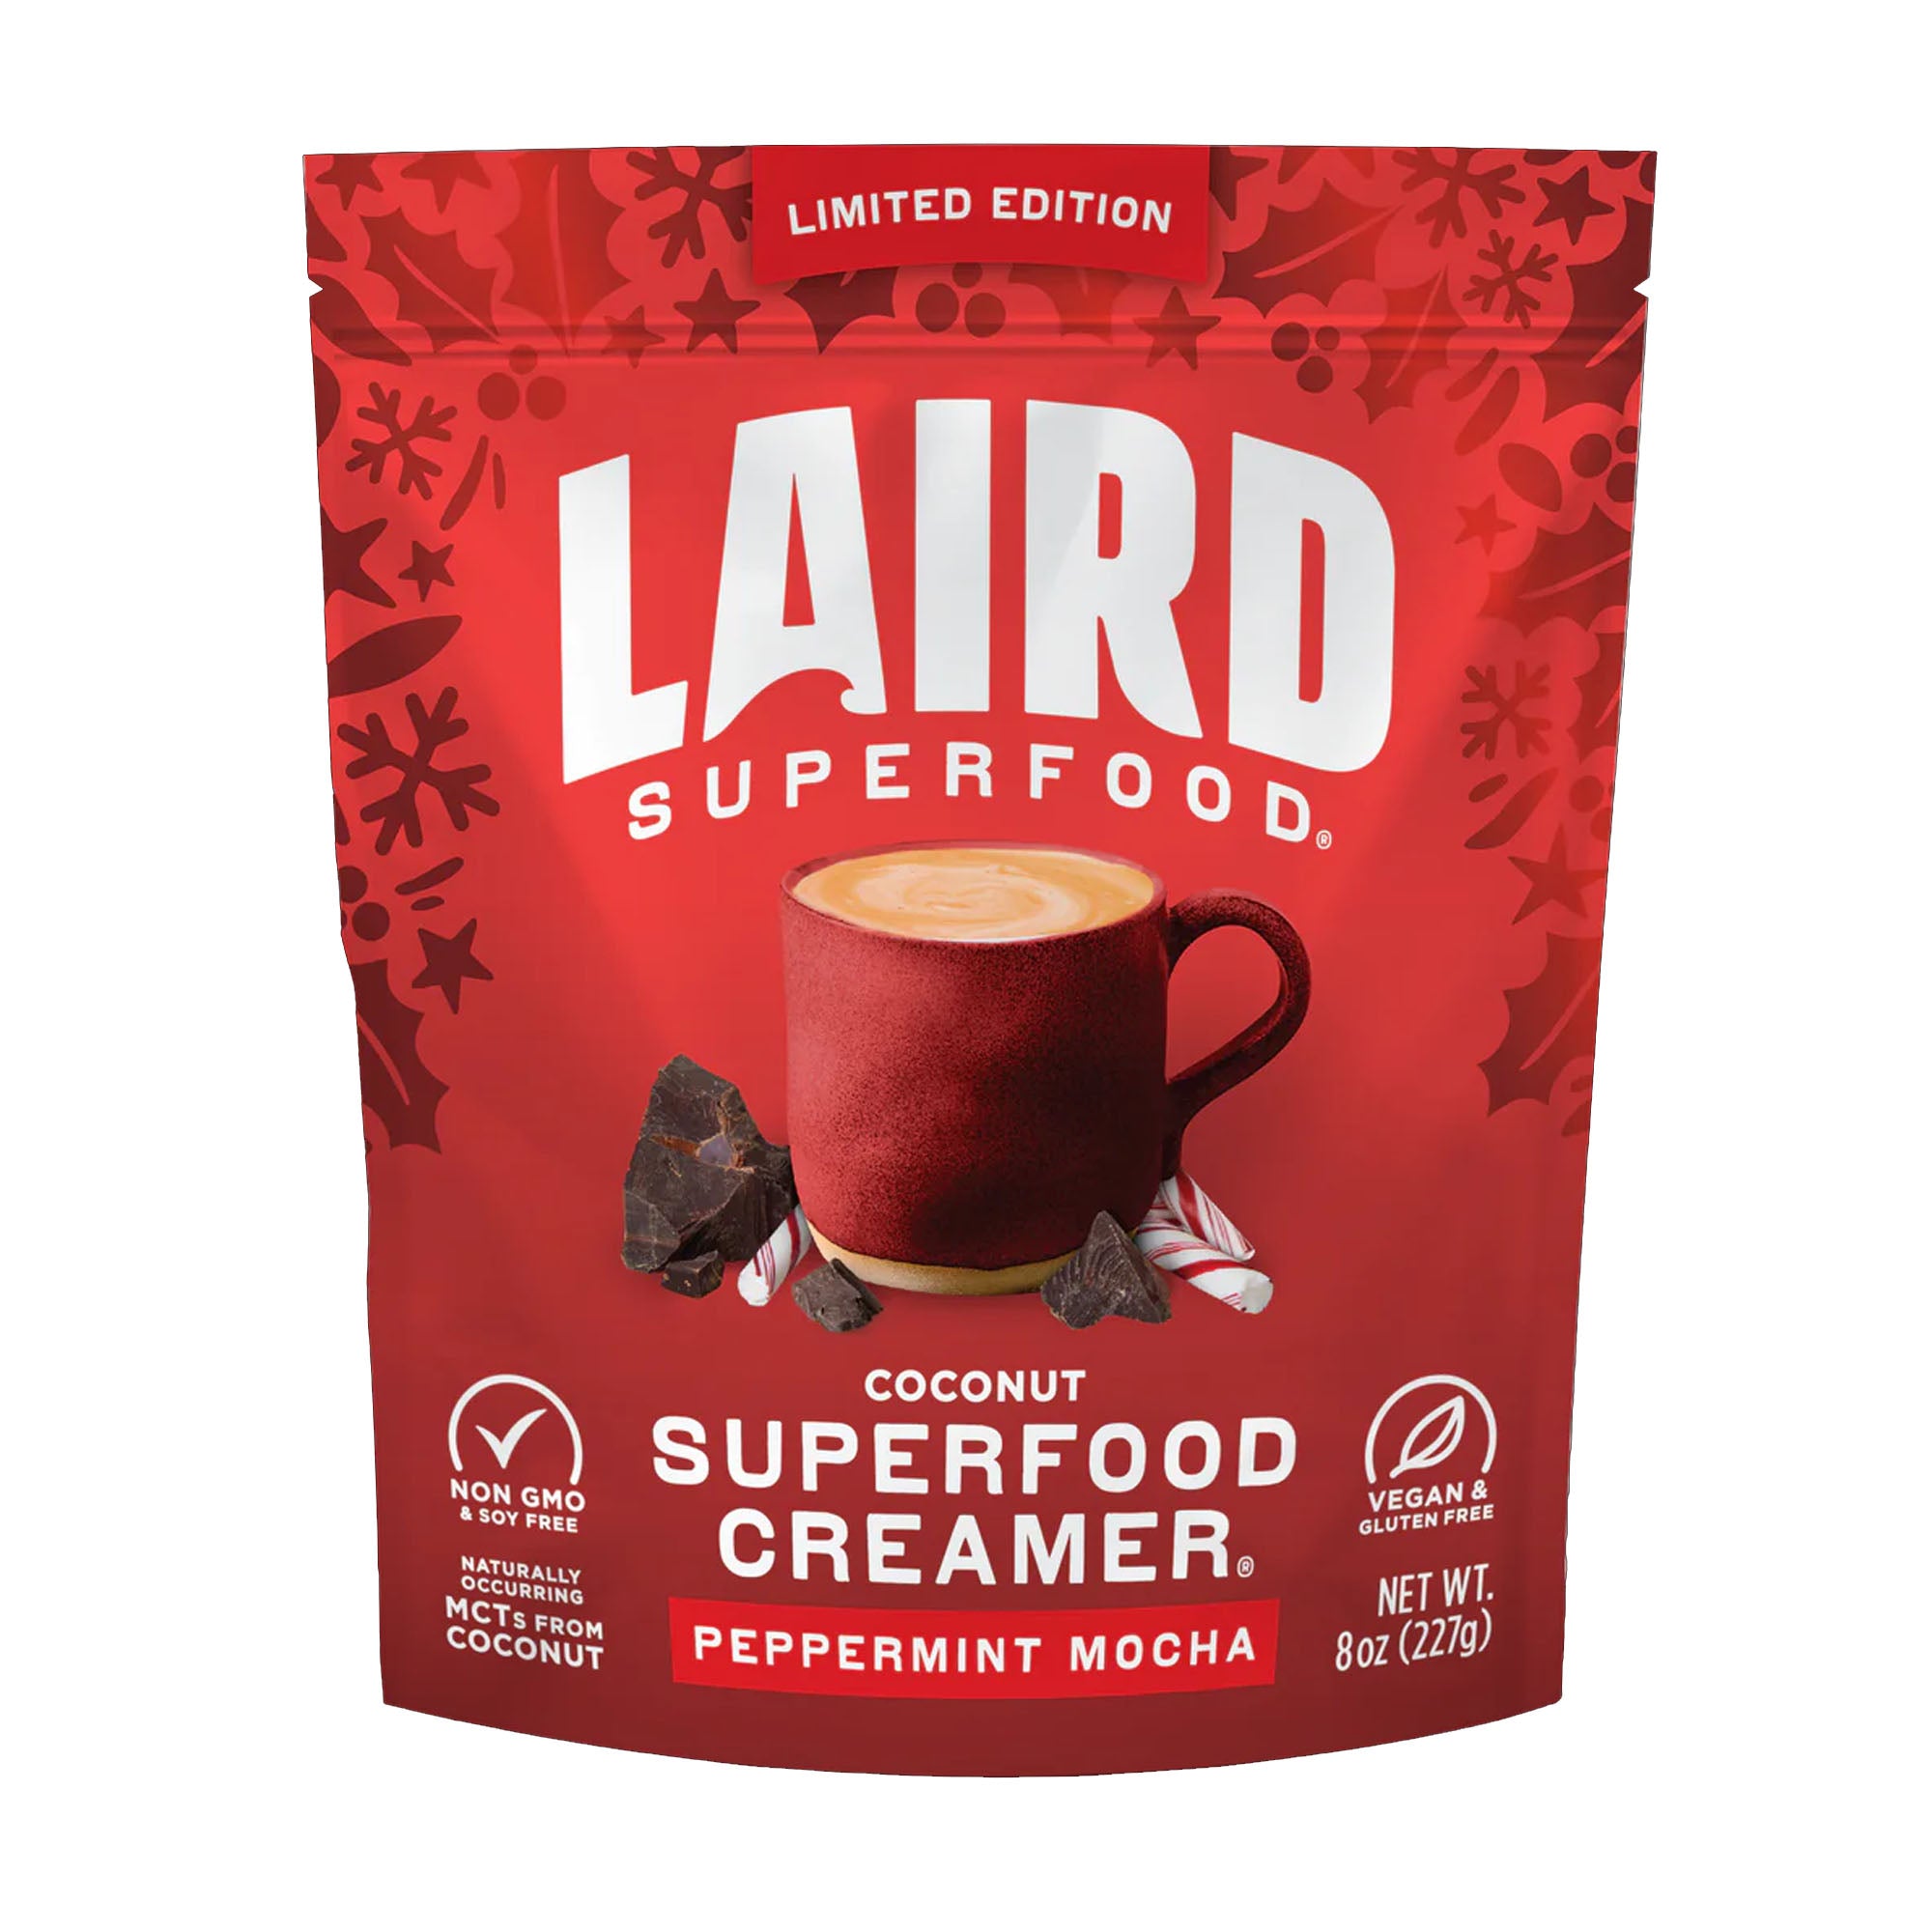 Laird Superfood Peppermint Mocha Creamer